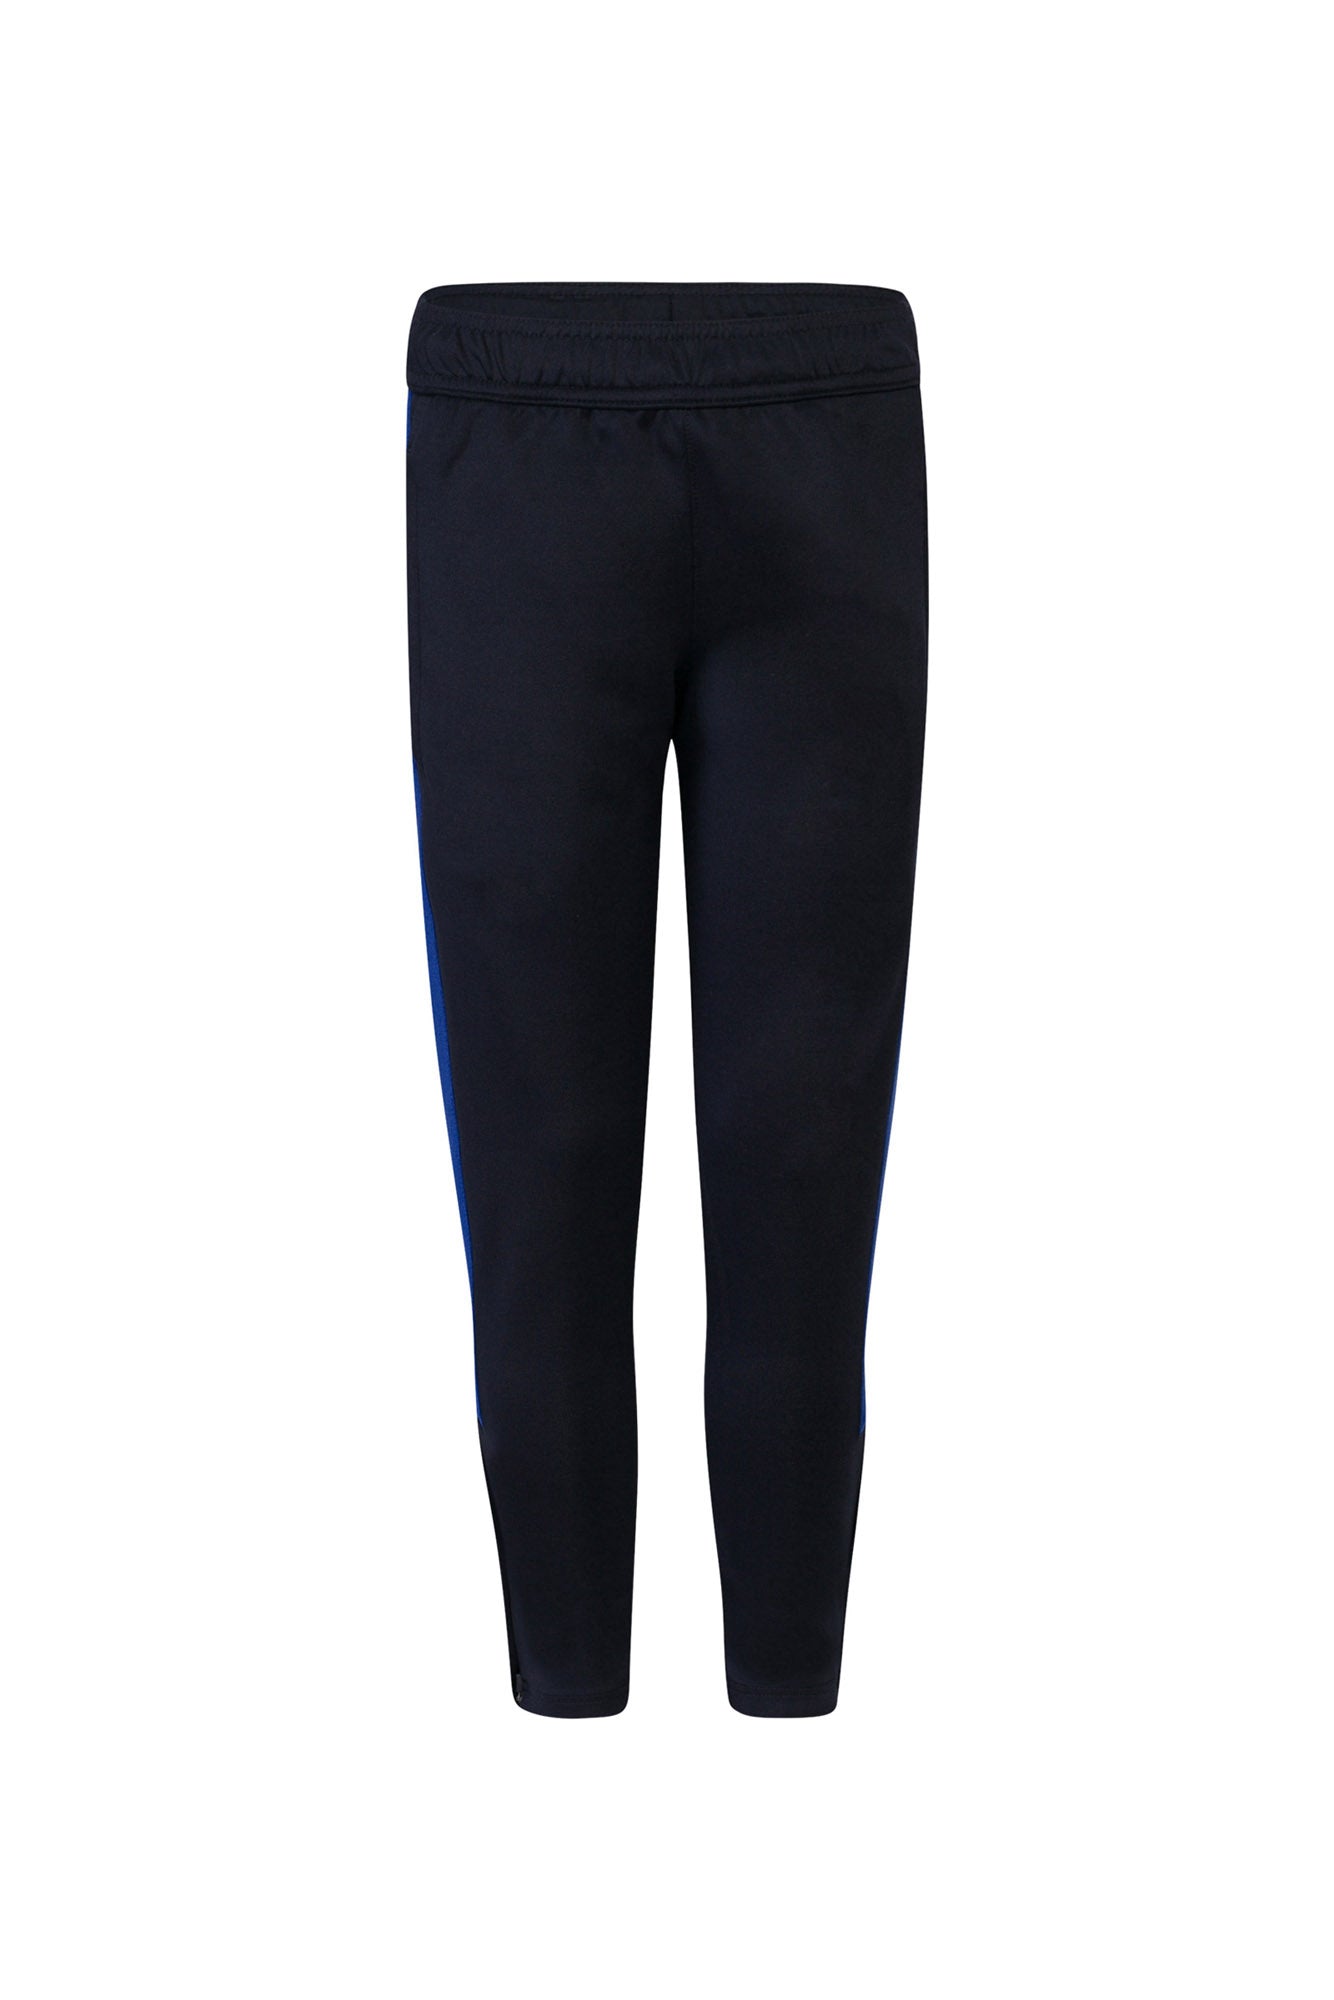 Navy And Royal Blue Tracksuit Bottoms